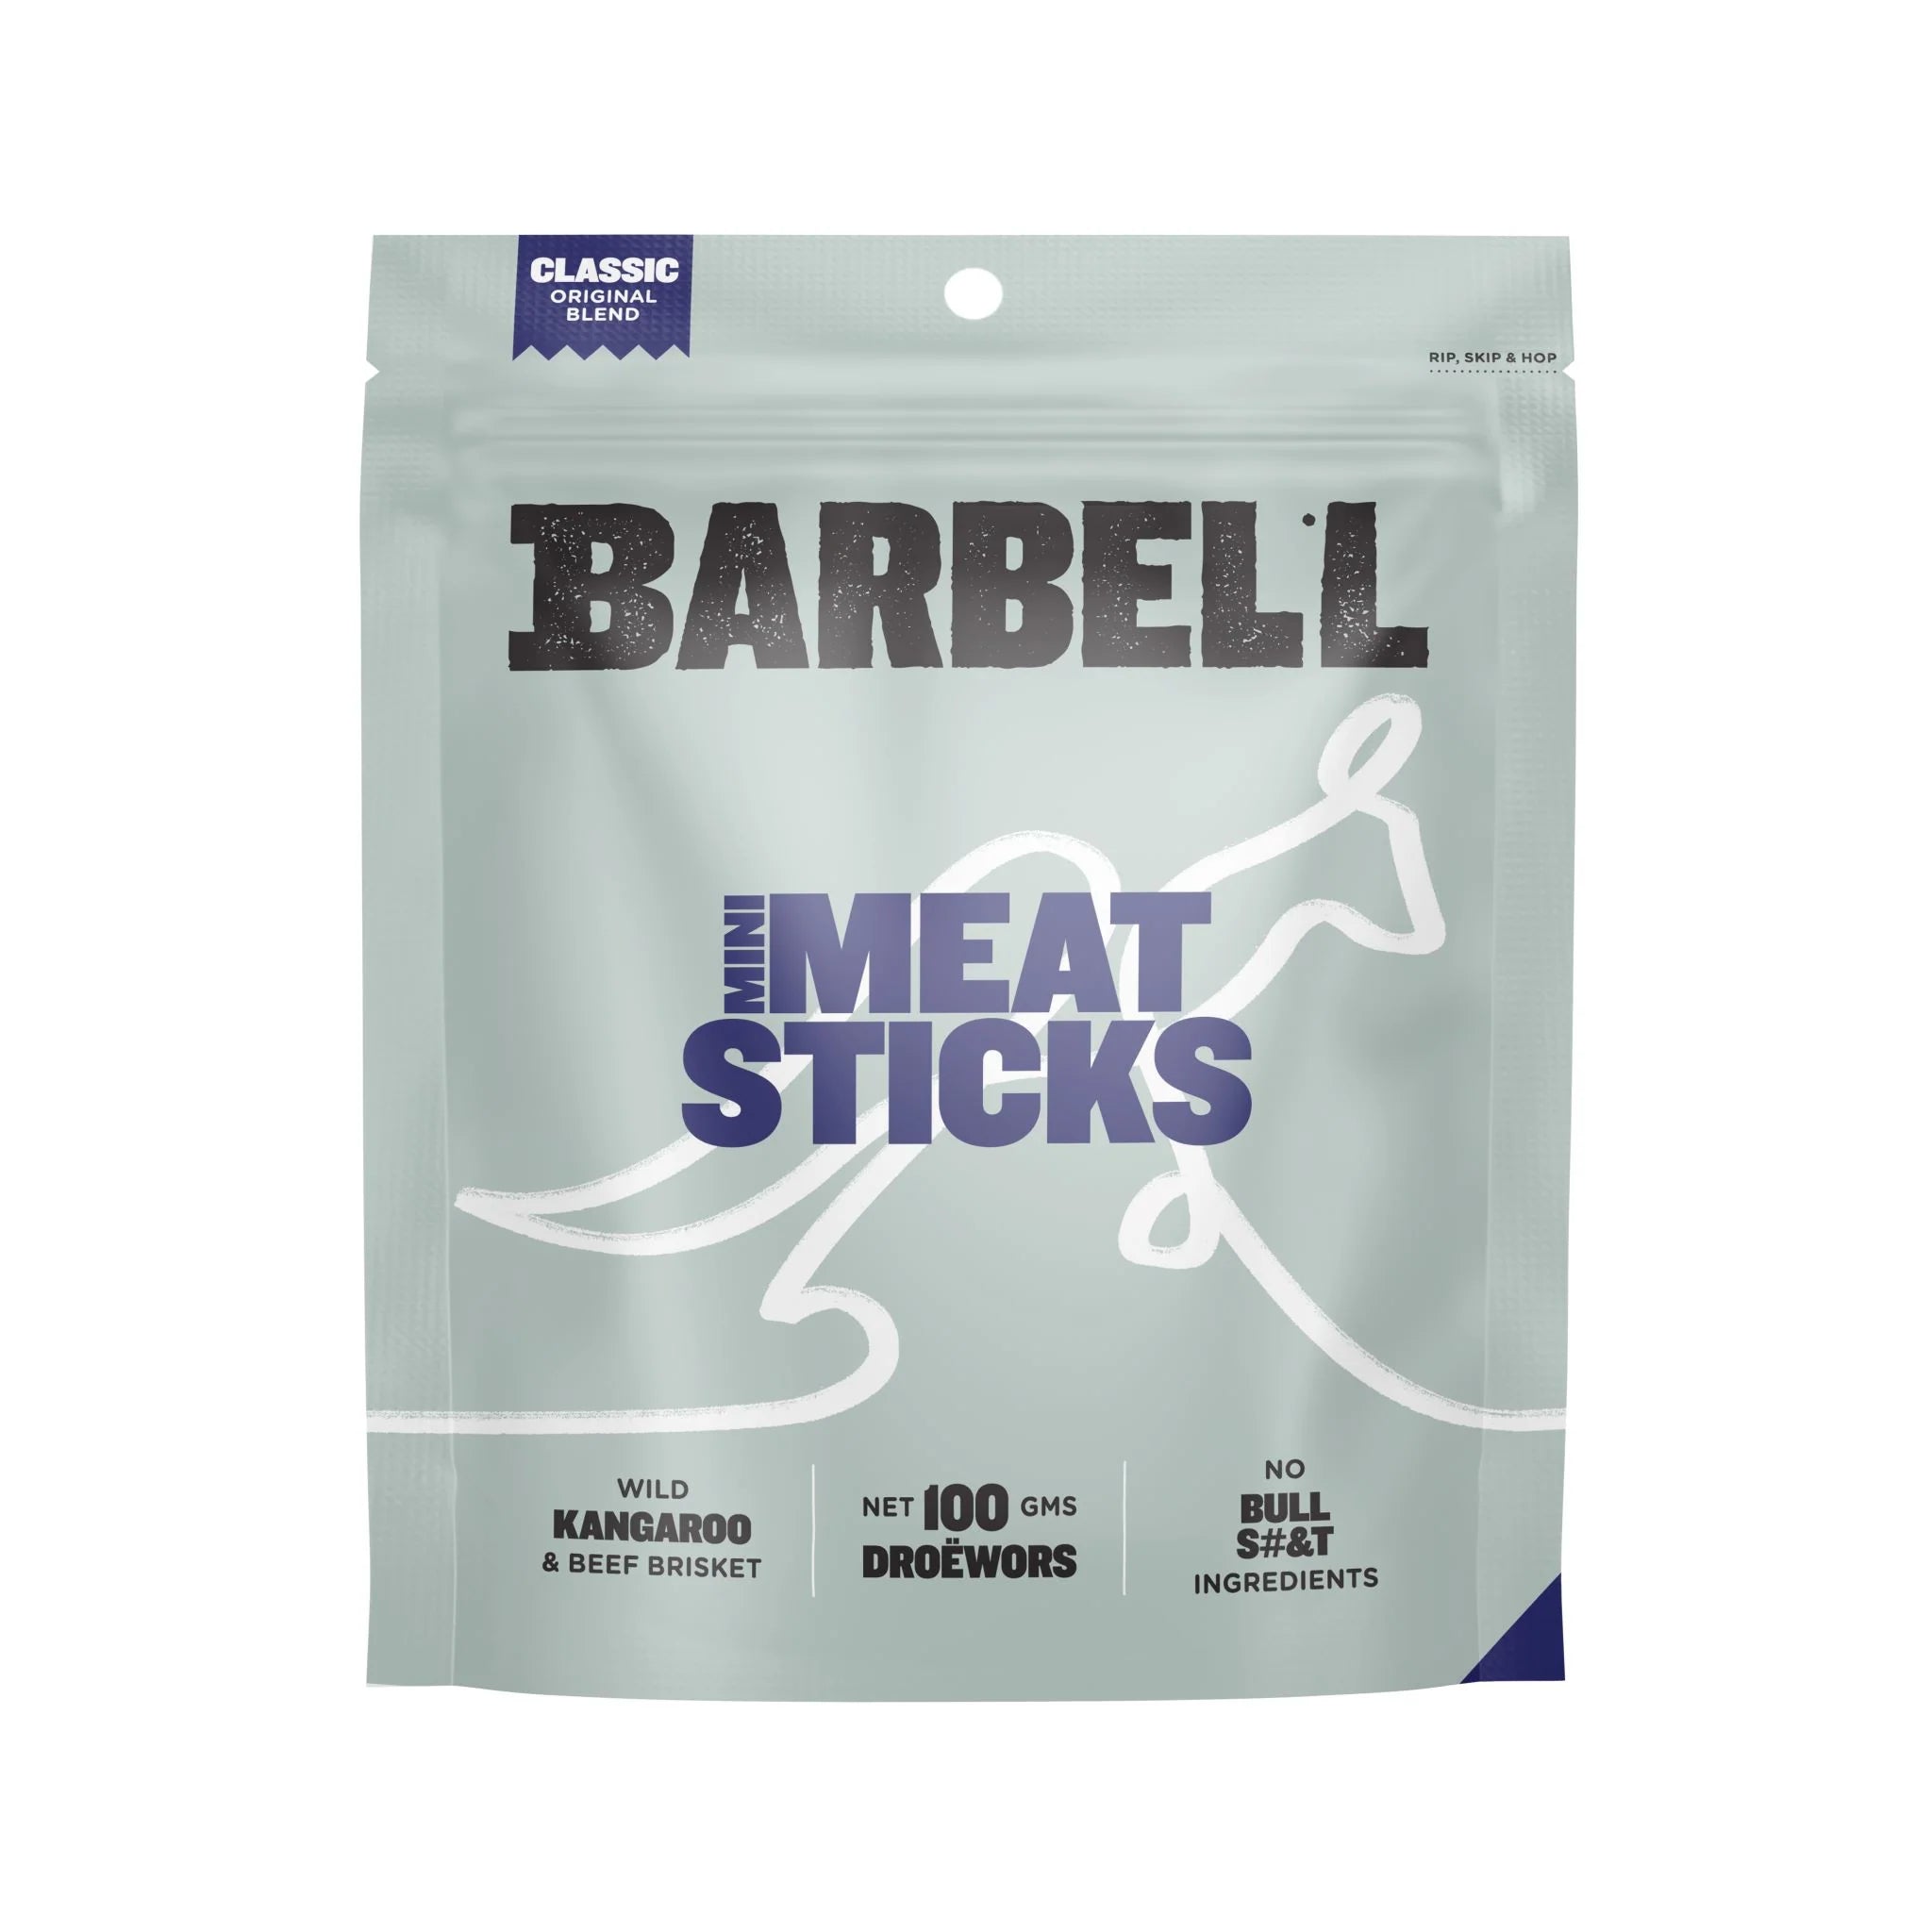 Barbell Meat Sticks - Various Flavours - 100g - CLASSIC - Mansfield Hunting & Fishing - Products to prepare for Corona Virus